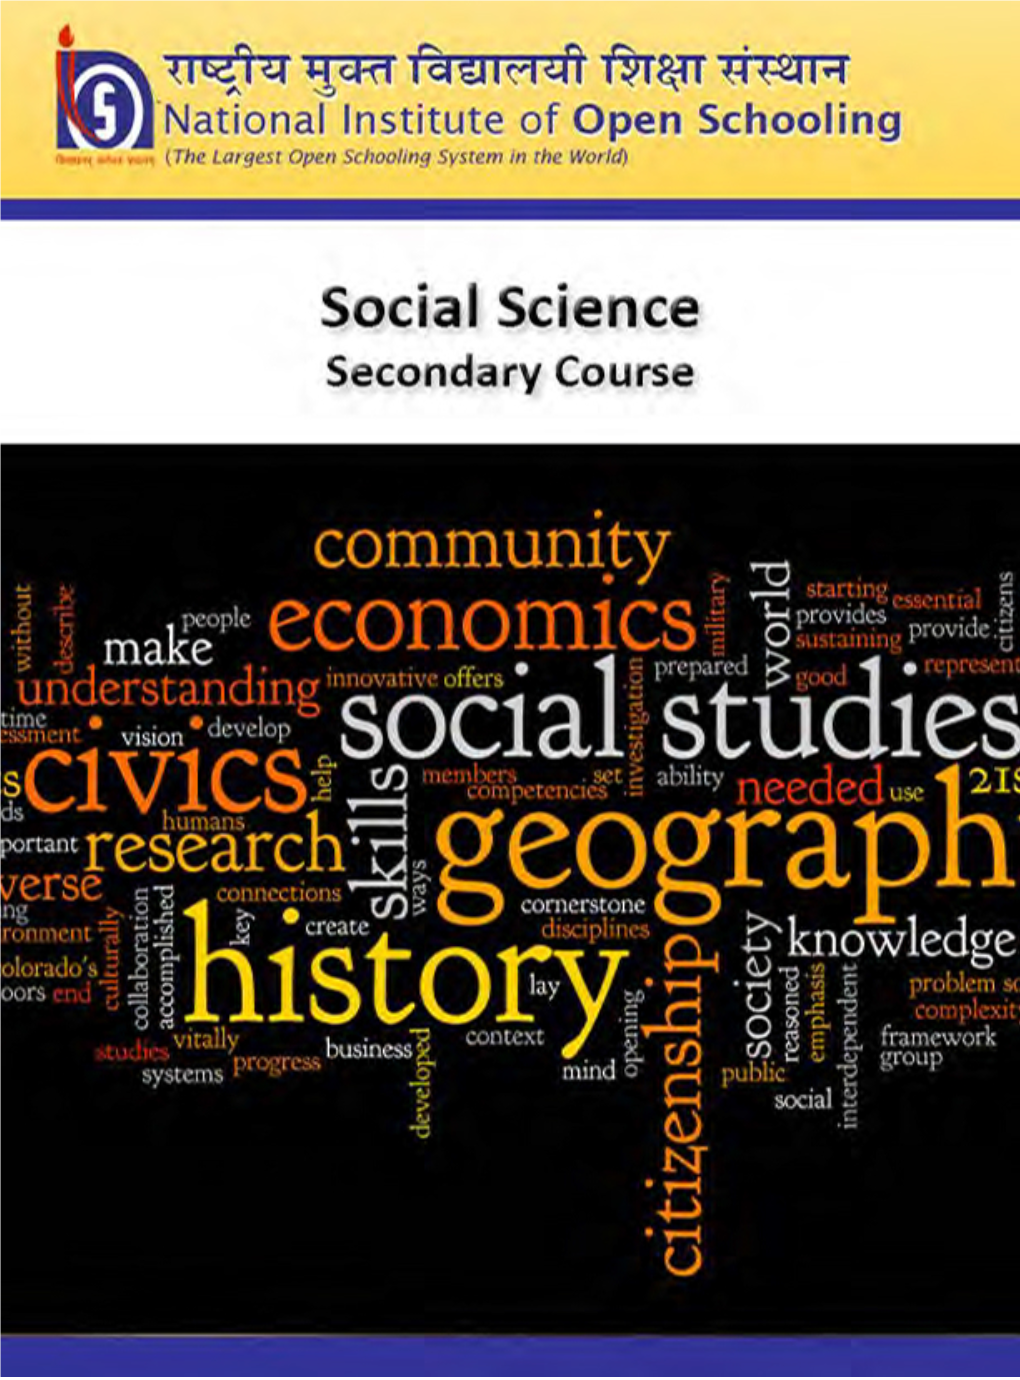 Introduction to Social Science